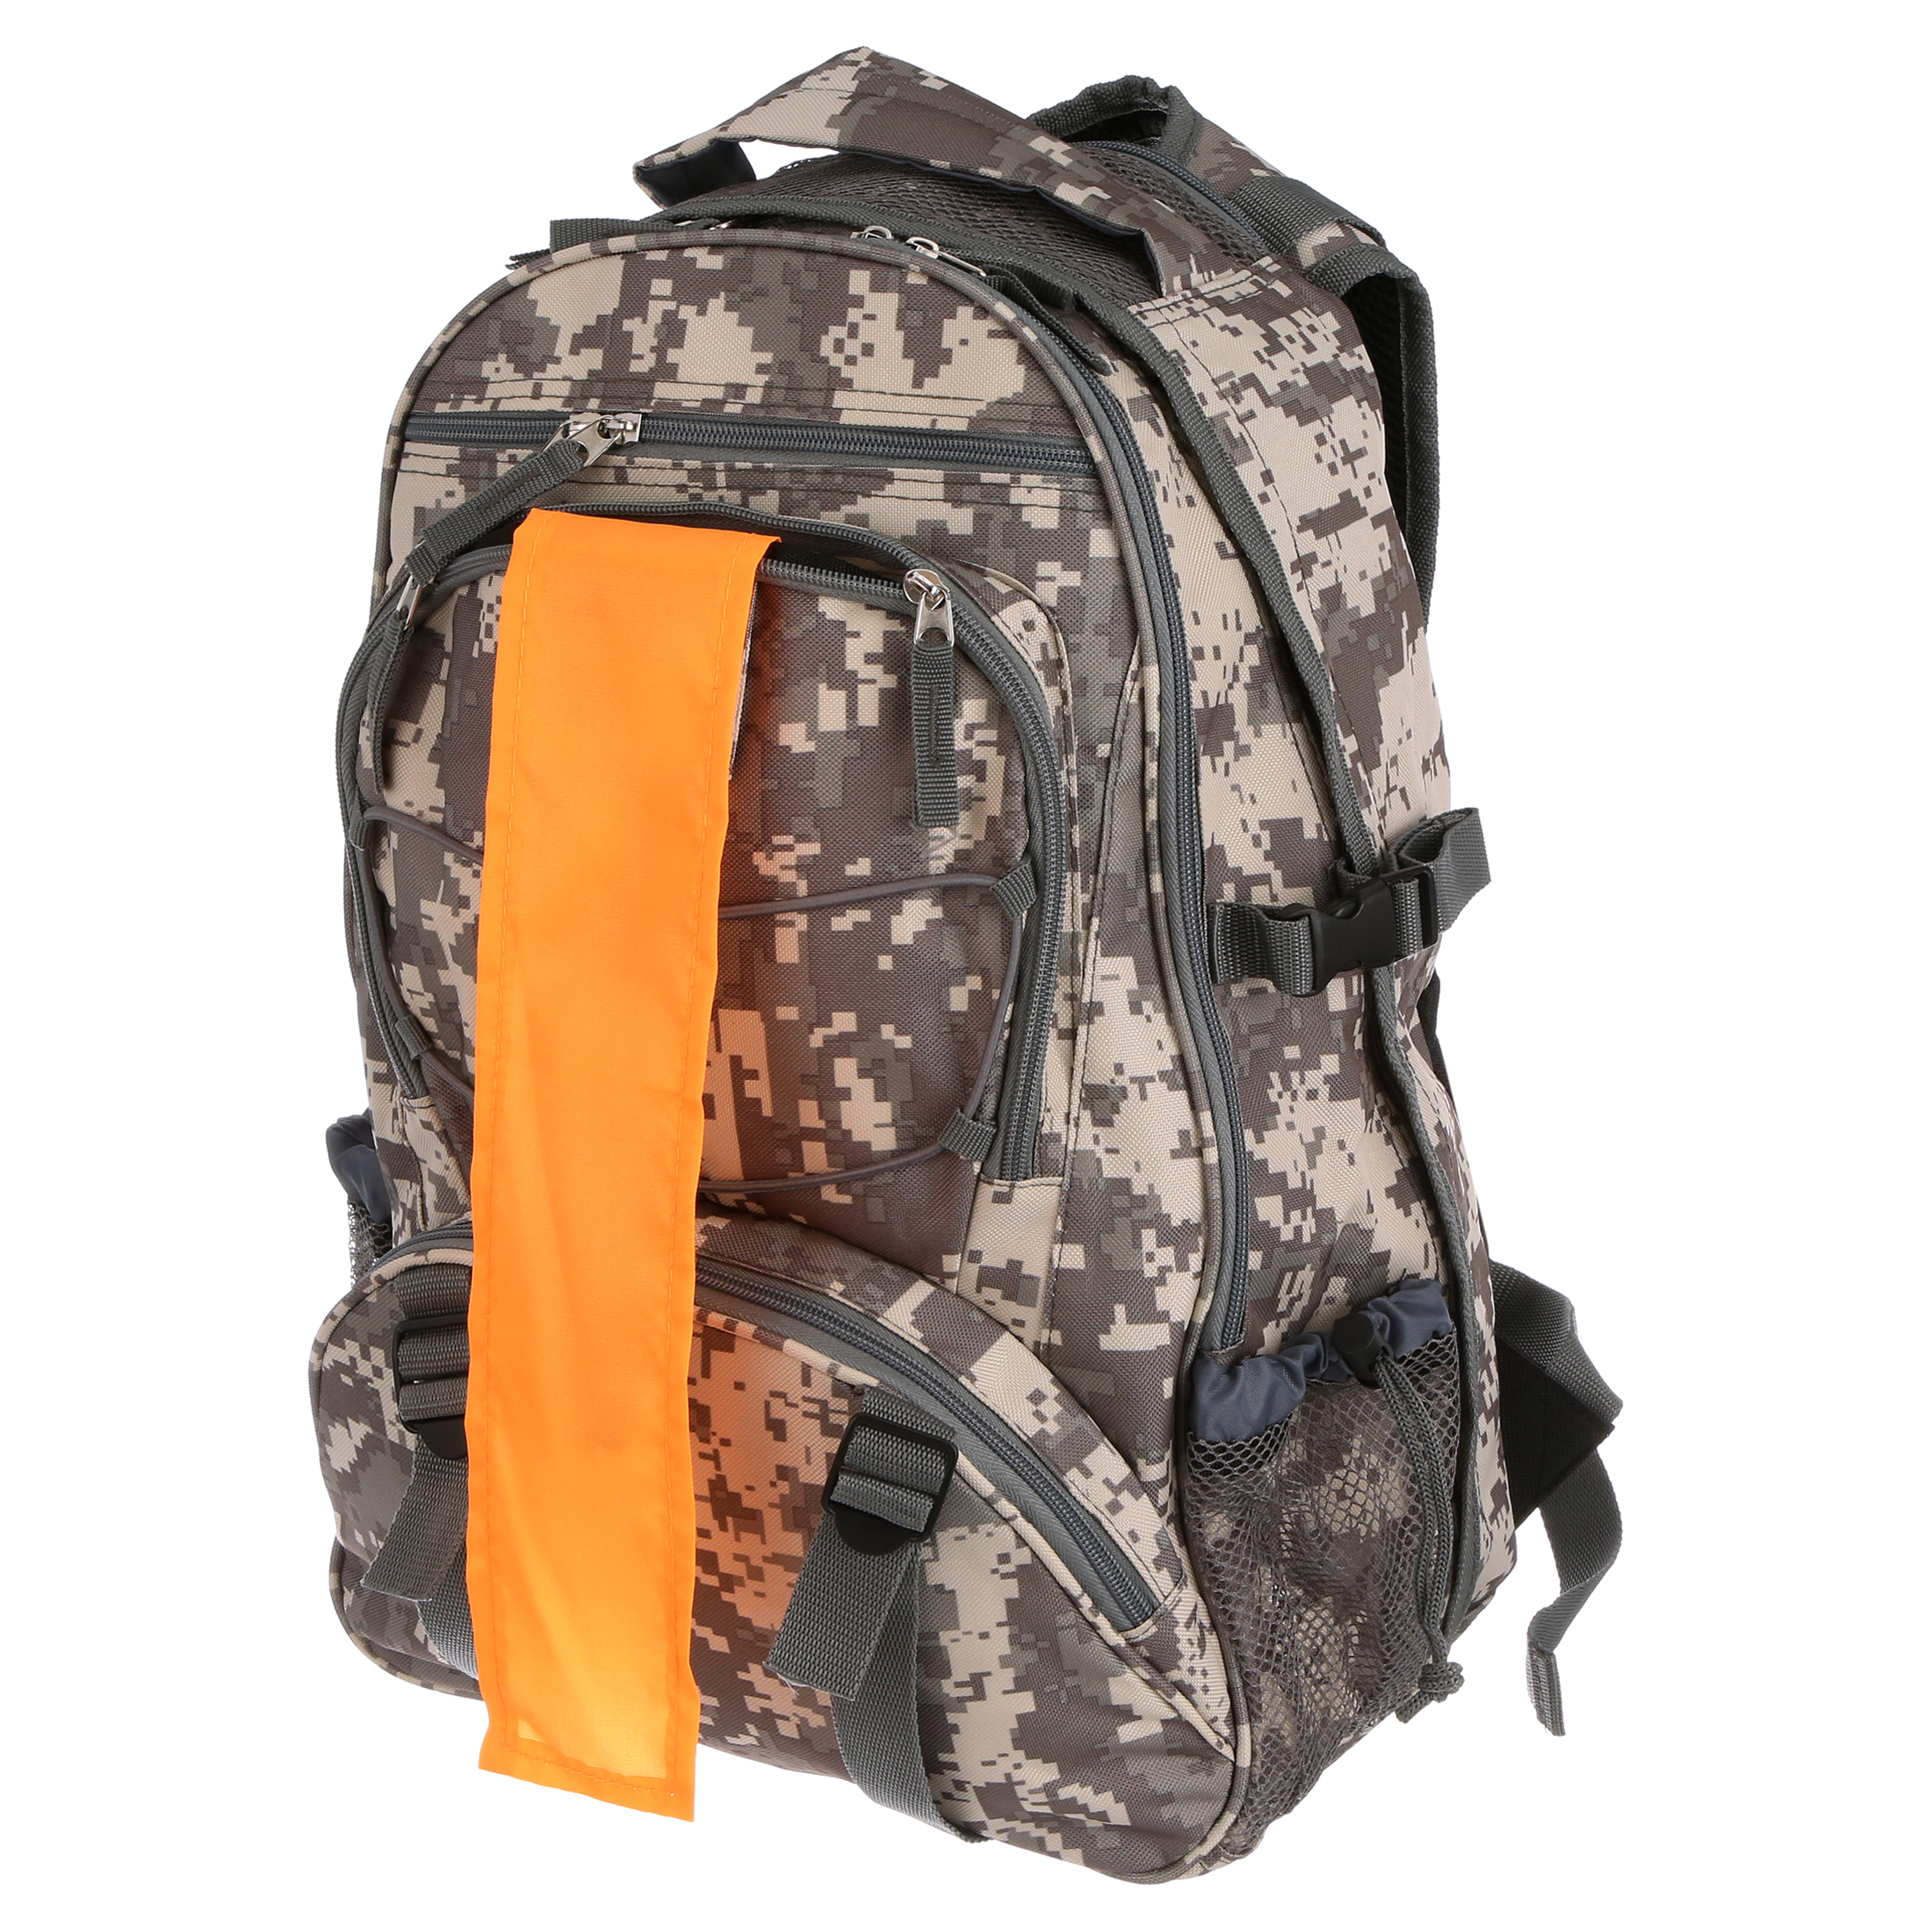 Readywise 5-Day Survival Backpack - Camo - image 10 of 11